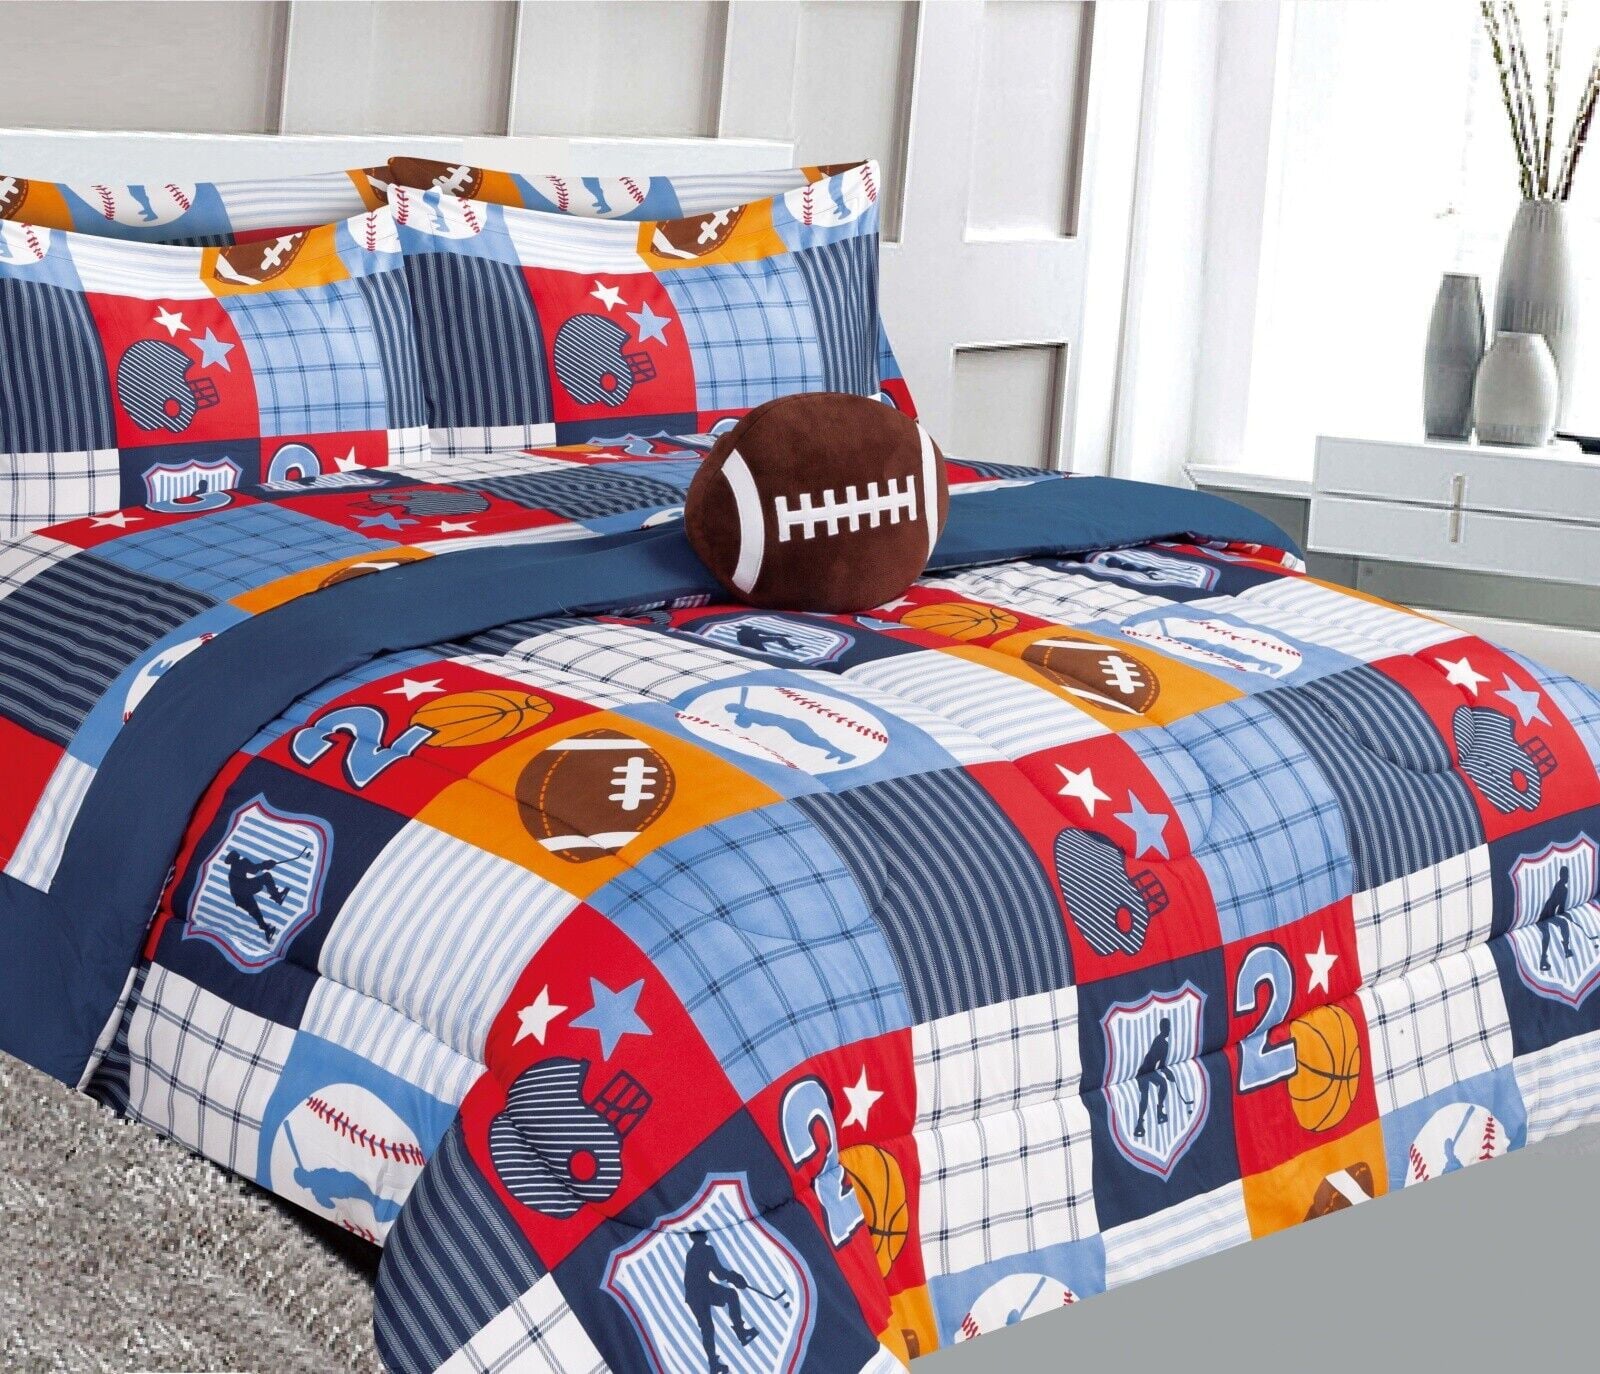 Bedding comforter in full size patchwork design matching sheet set for kids bedroom décor for girls boys 8 pieces